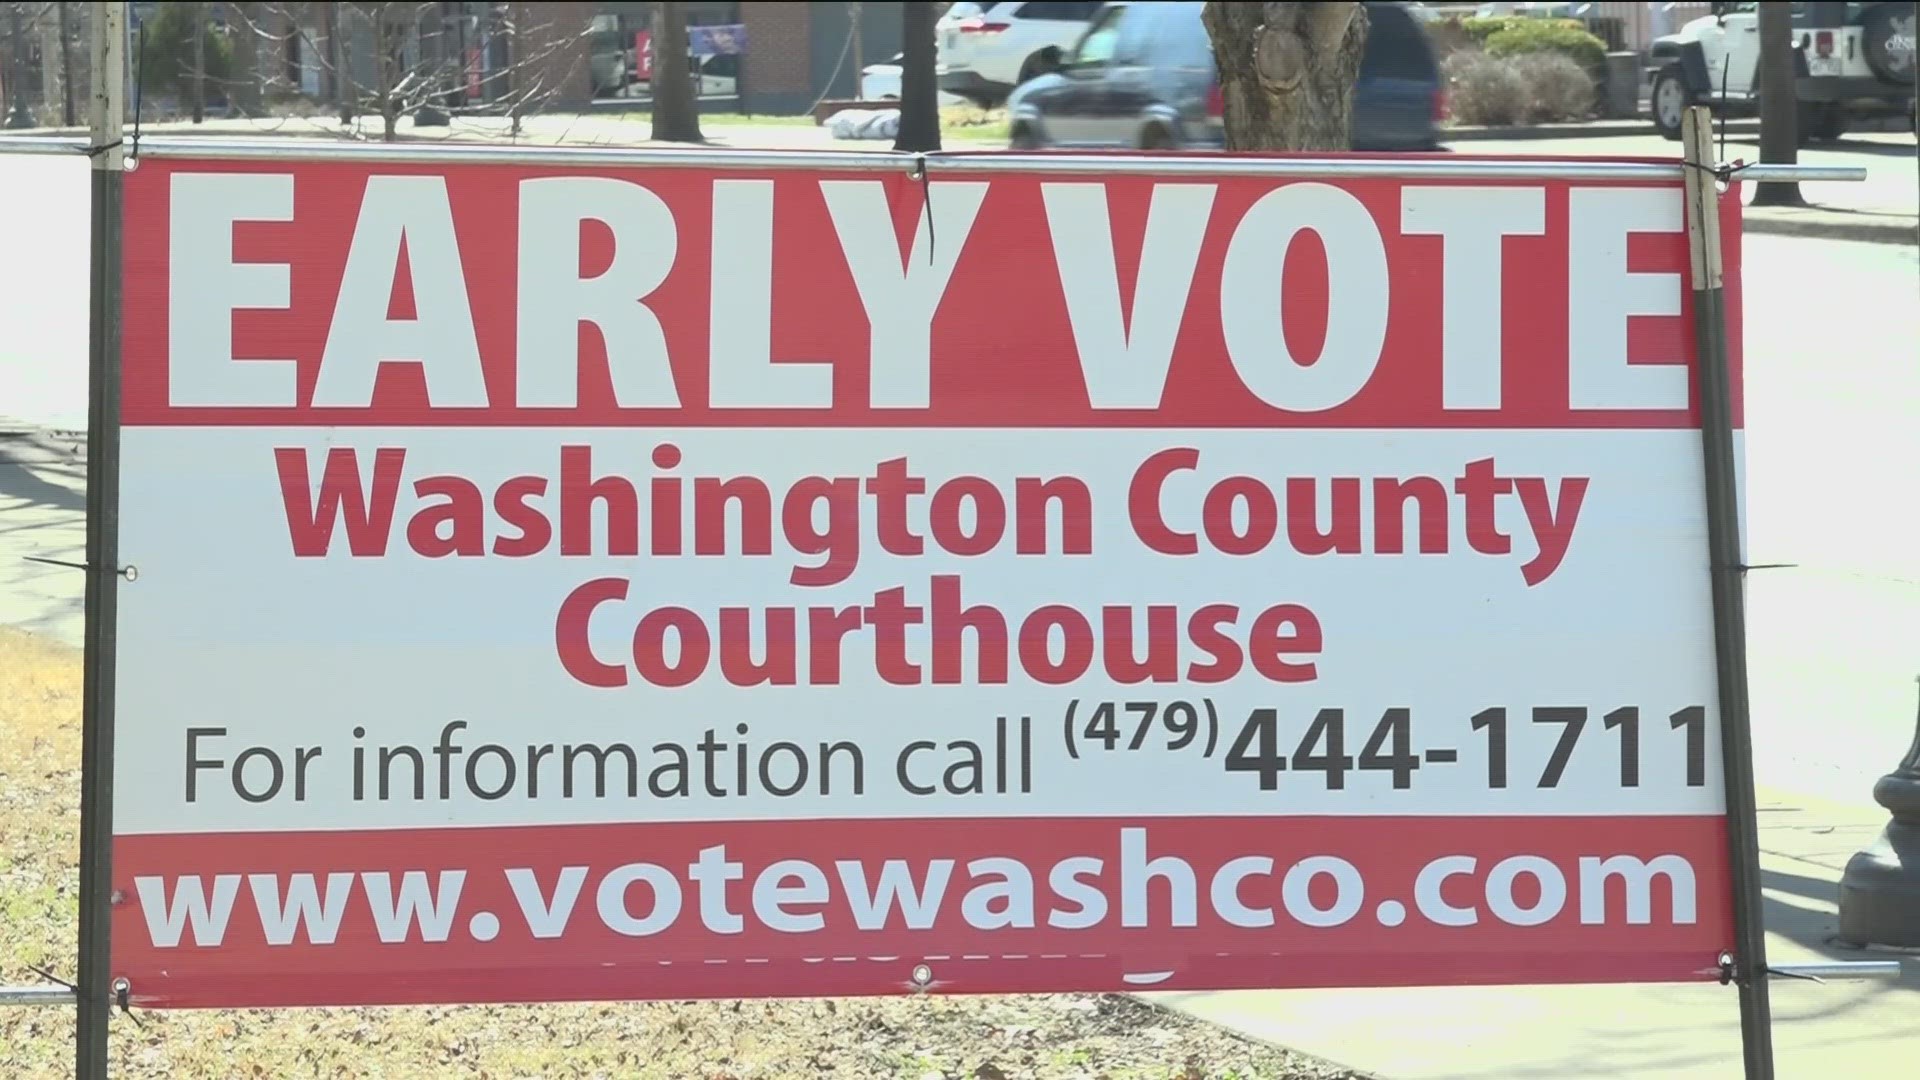 SUPER TUESDAY IS TWO WEEKS FROM TONIGHT - AND EARLY VOTING FOR THE MARCH FIFTH PRIMARY STARTED TODAY...